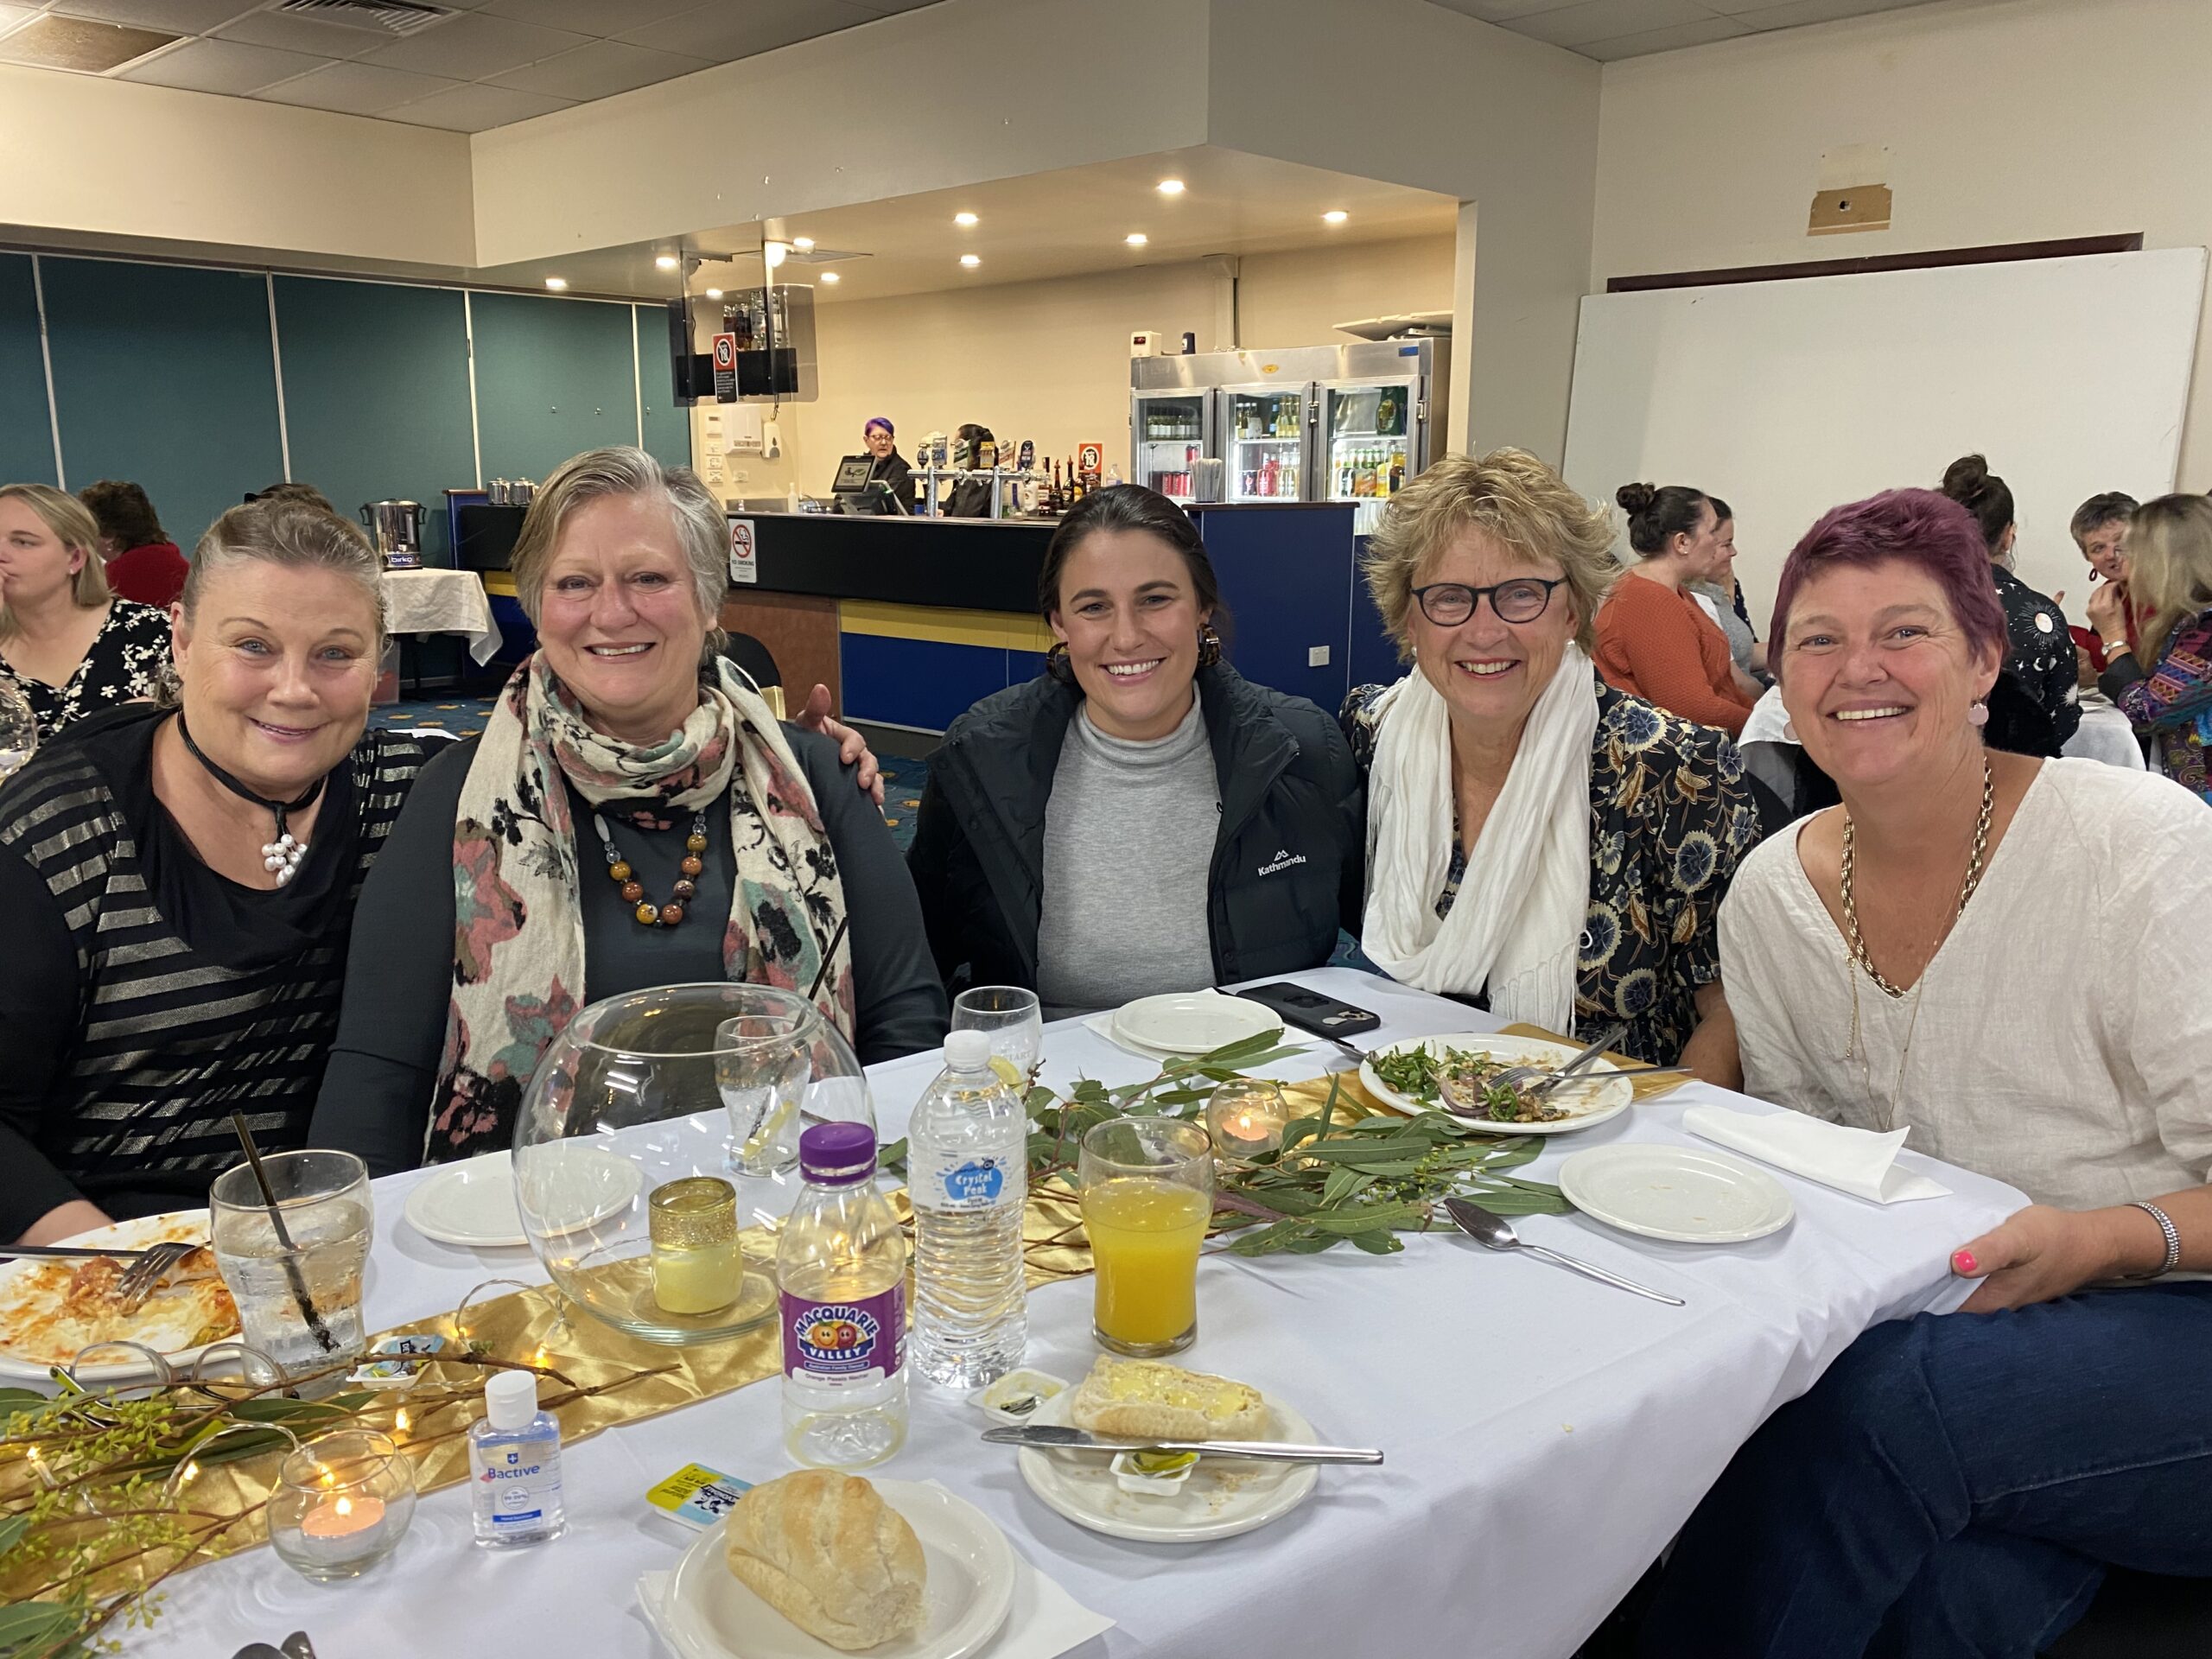 Lindy Farrer, Sandy Tapscott, Grace Farrer, Maria McDonell and Karen Kirkby enjoying the delicious food and great entertainment.